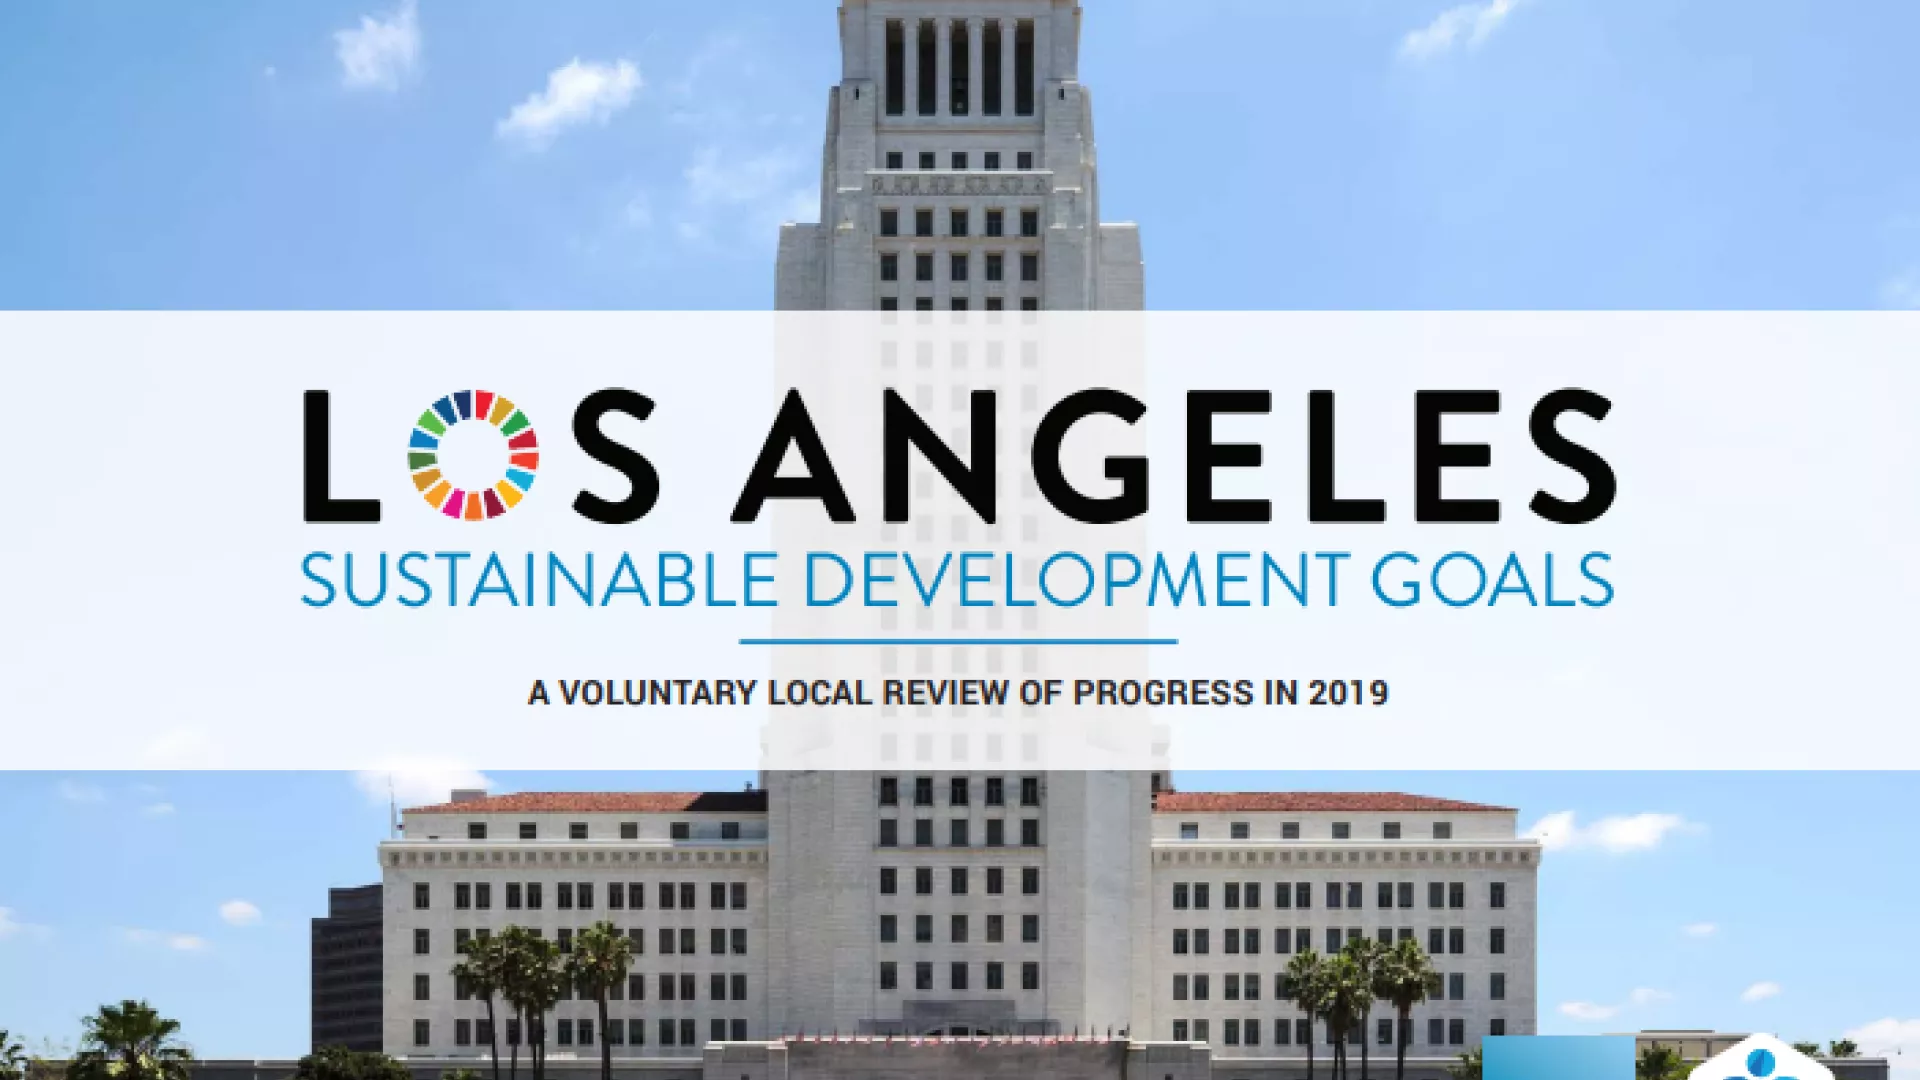 Image shows picture of Los Angeles City Hall with text "Los Angeles Sustainable Development Goals - a Voluntary Local Review of Progress in 2019"